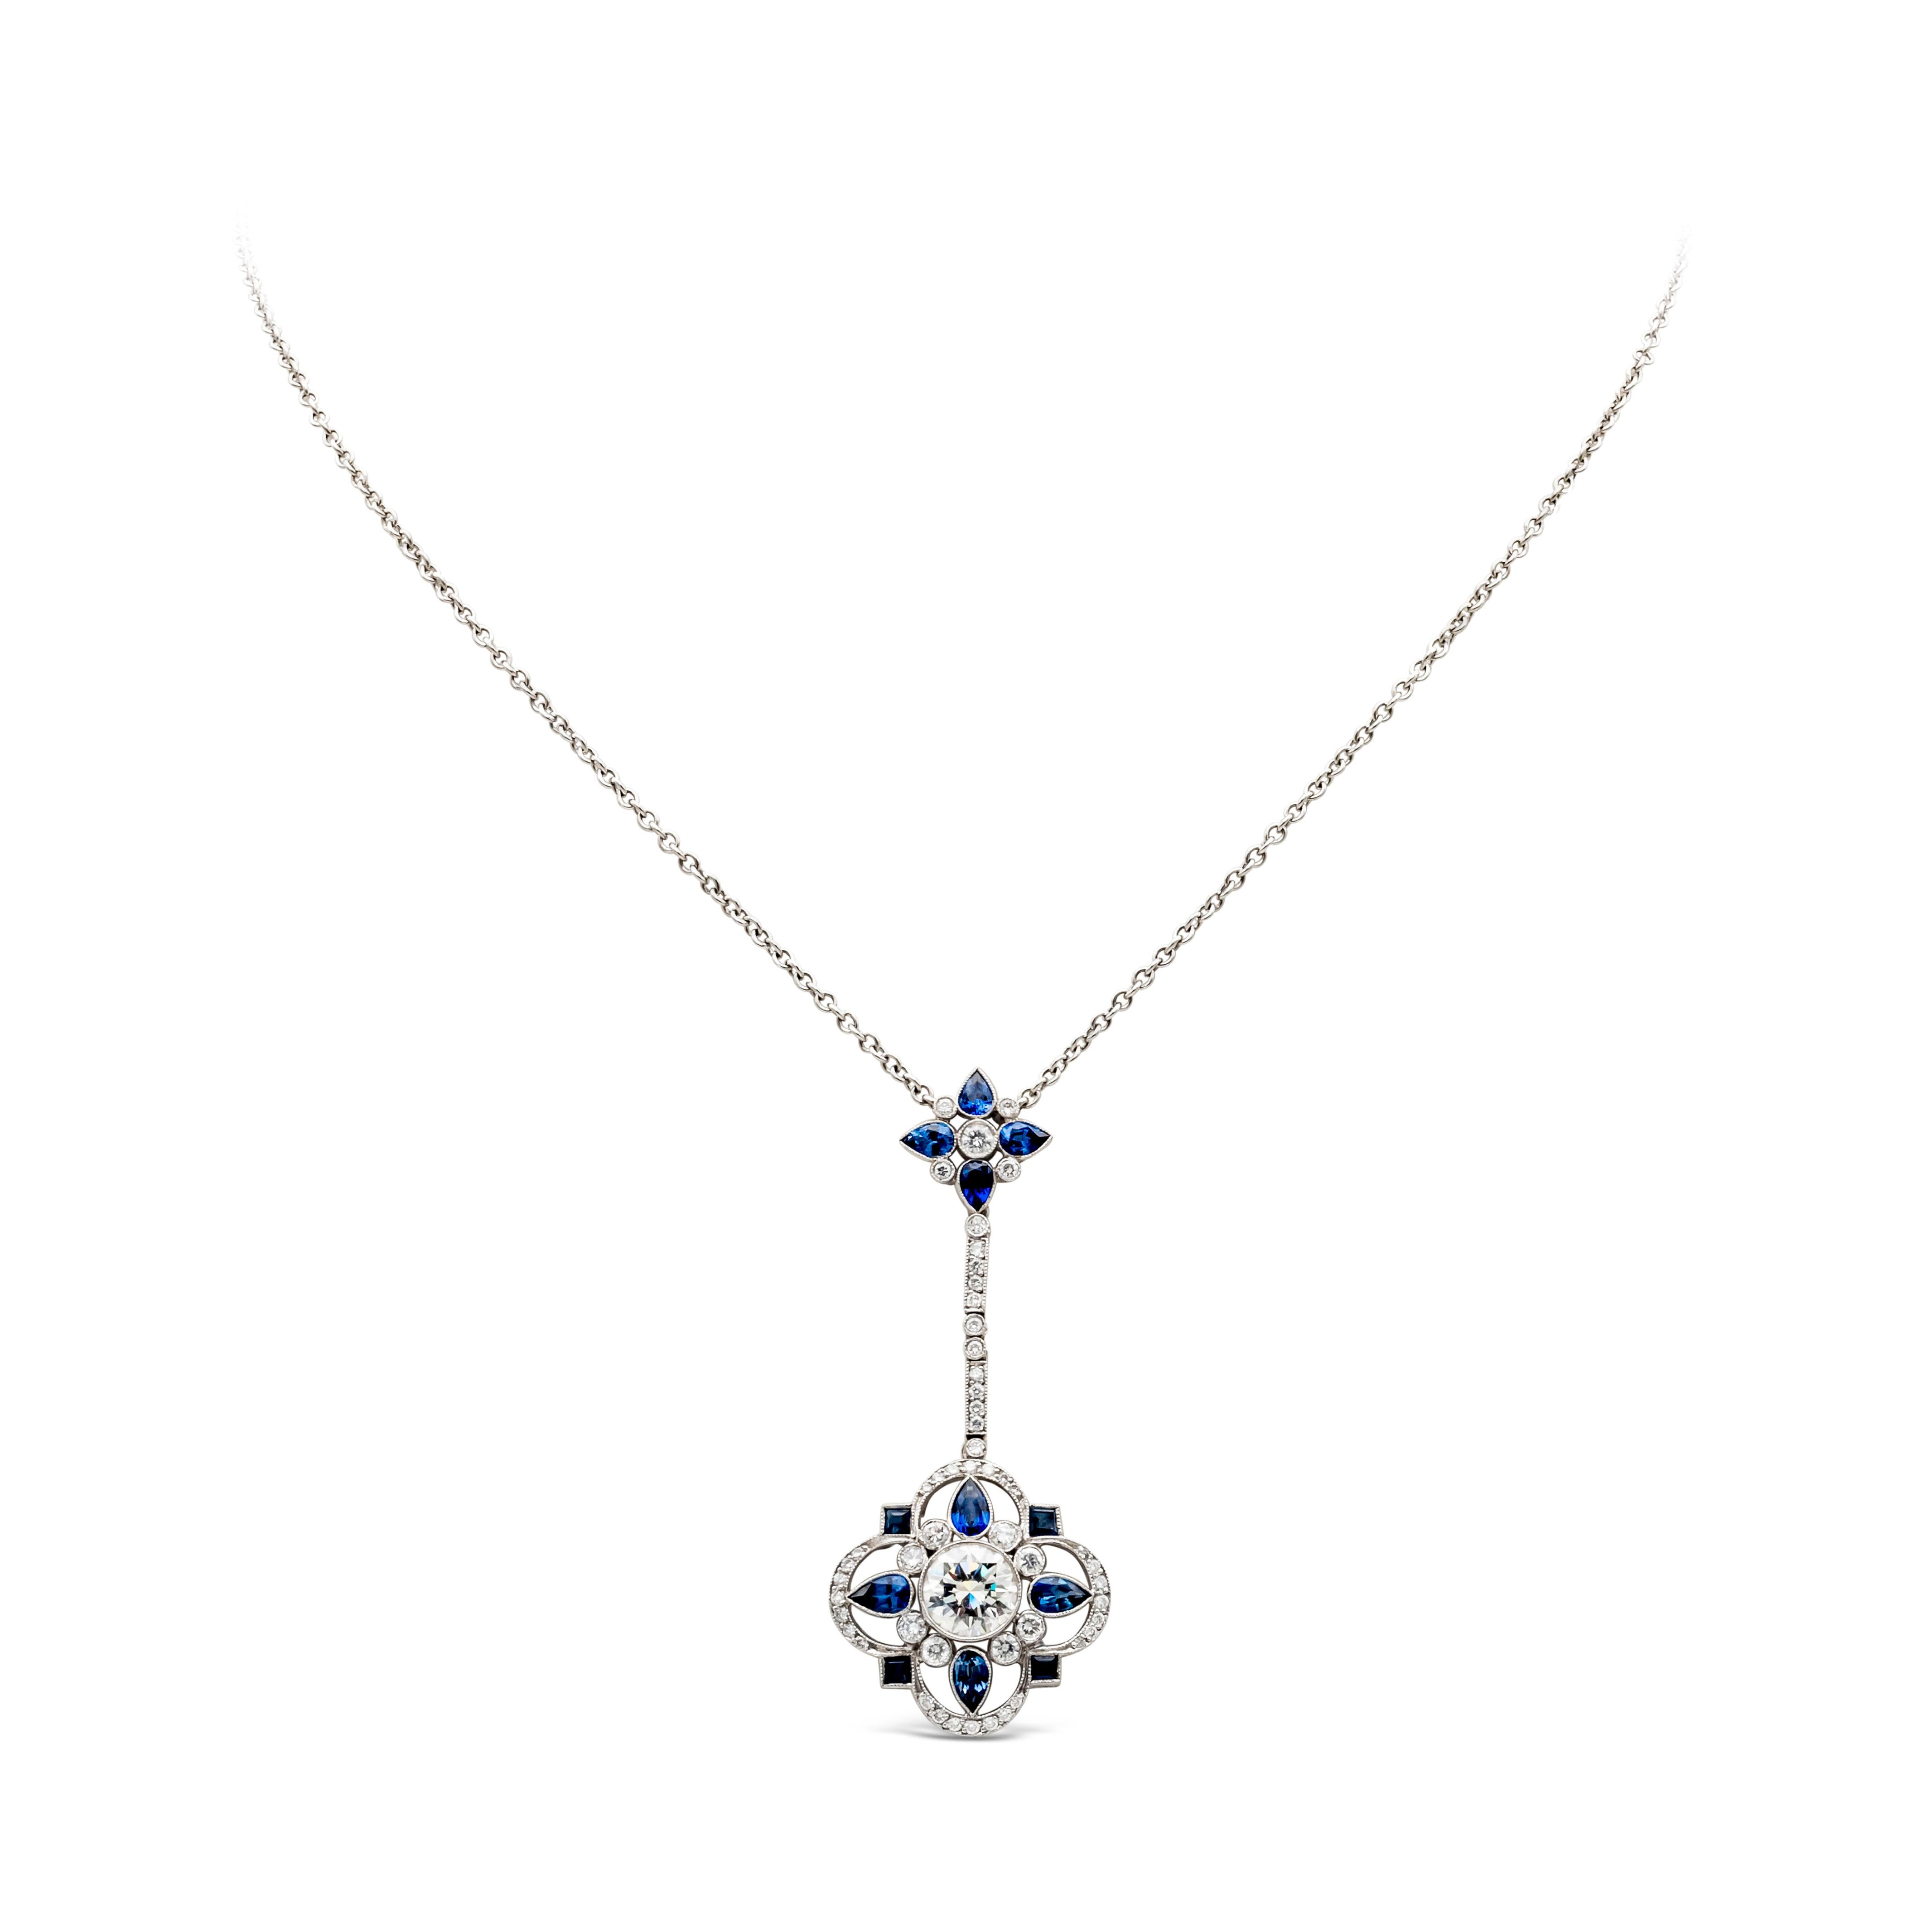 Set with a 1.38 carats round brilliant diamond center stone accented by 4 pear shape blue sapphires on each corner. Each sapphire is spaced by round cut diamonds in an open-work design. Pendant spaced by a single line metal set with round cut